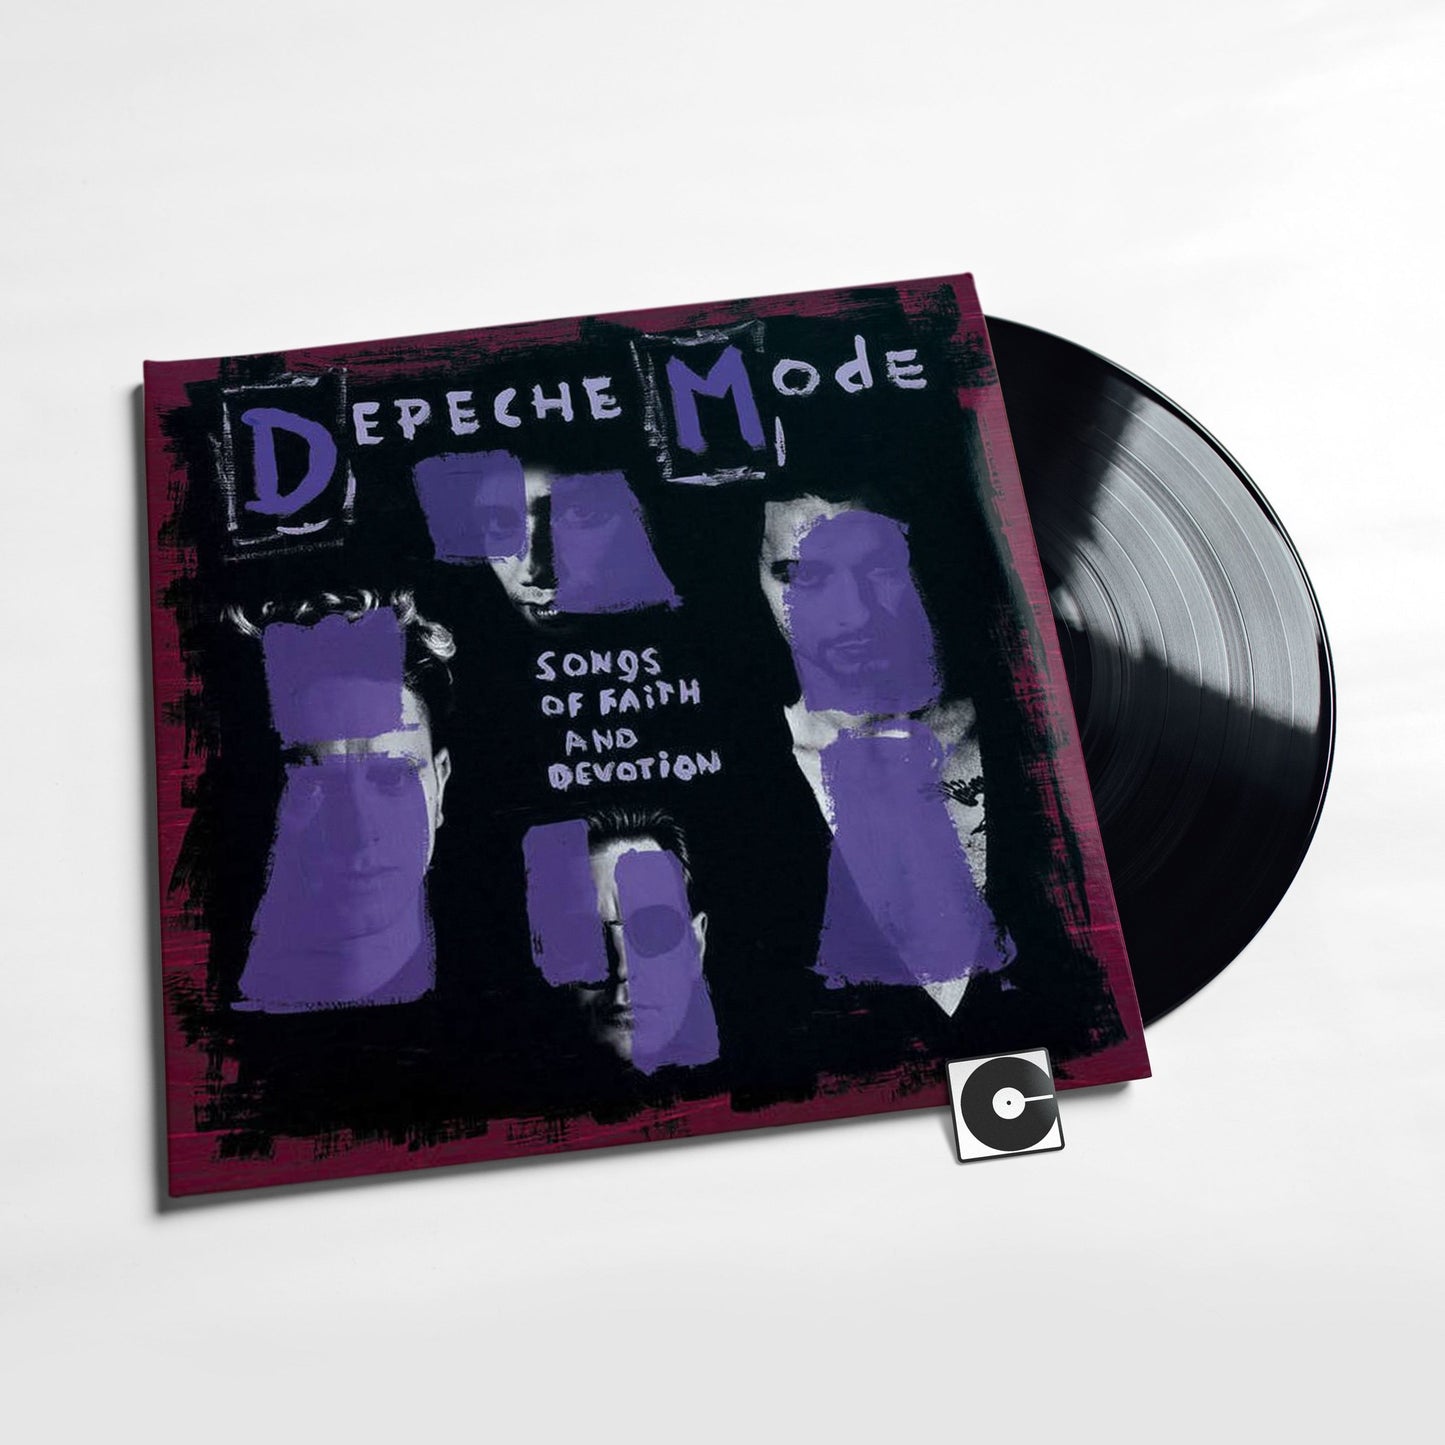 Depeche Mode - "Songs Of Faith And Devotion"